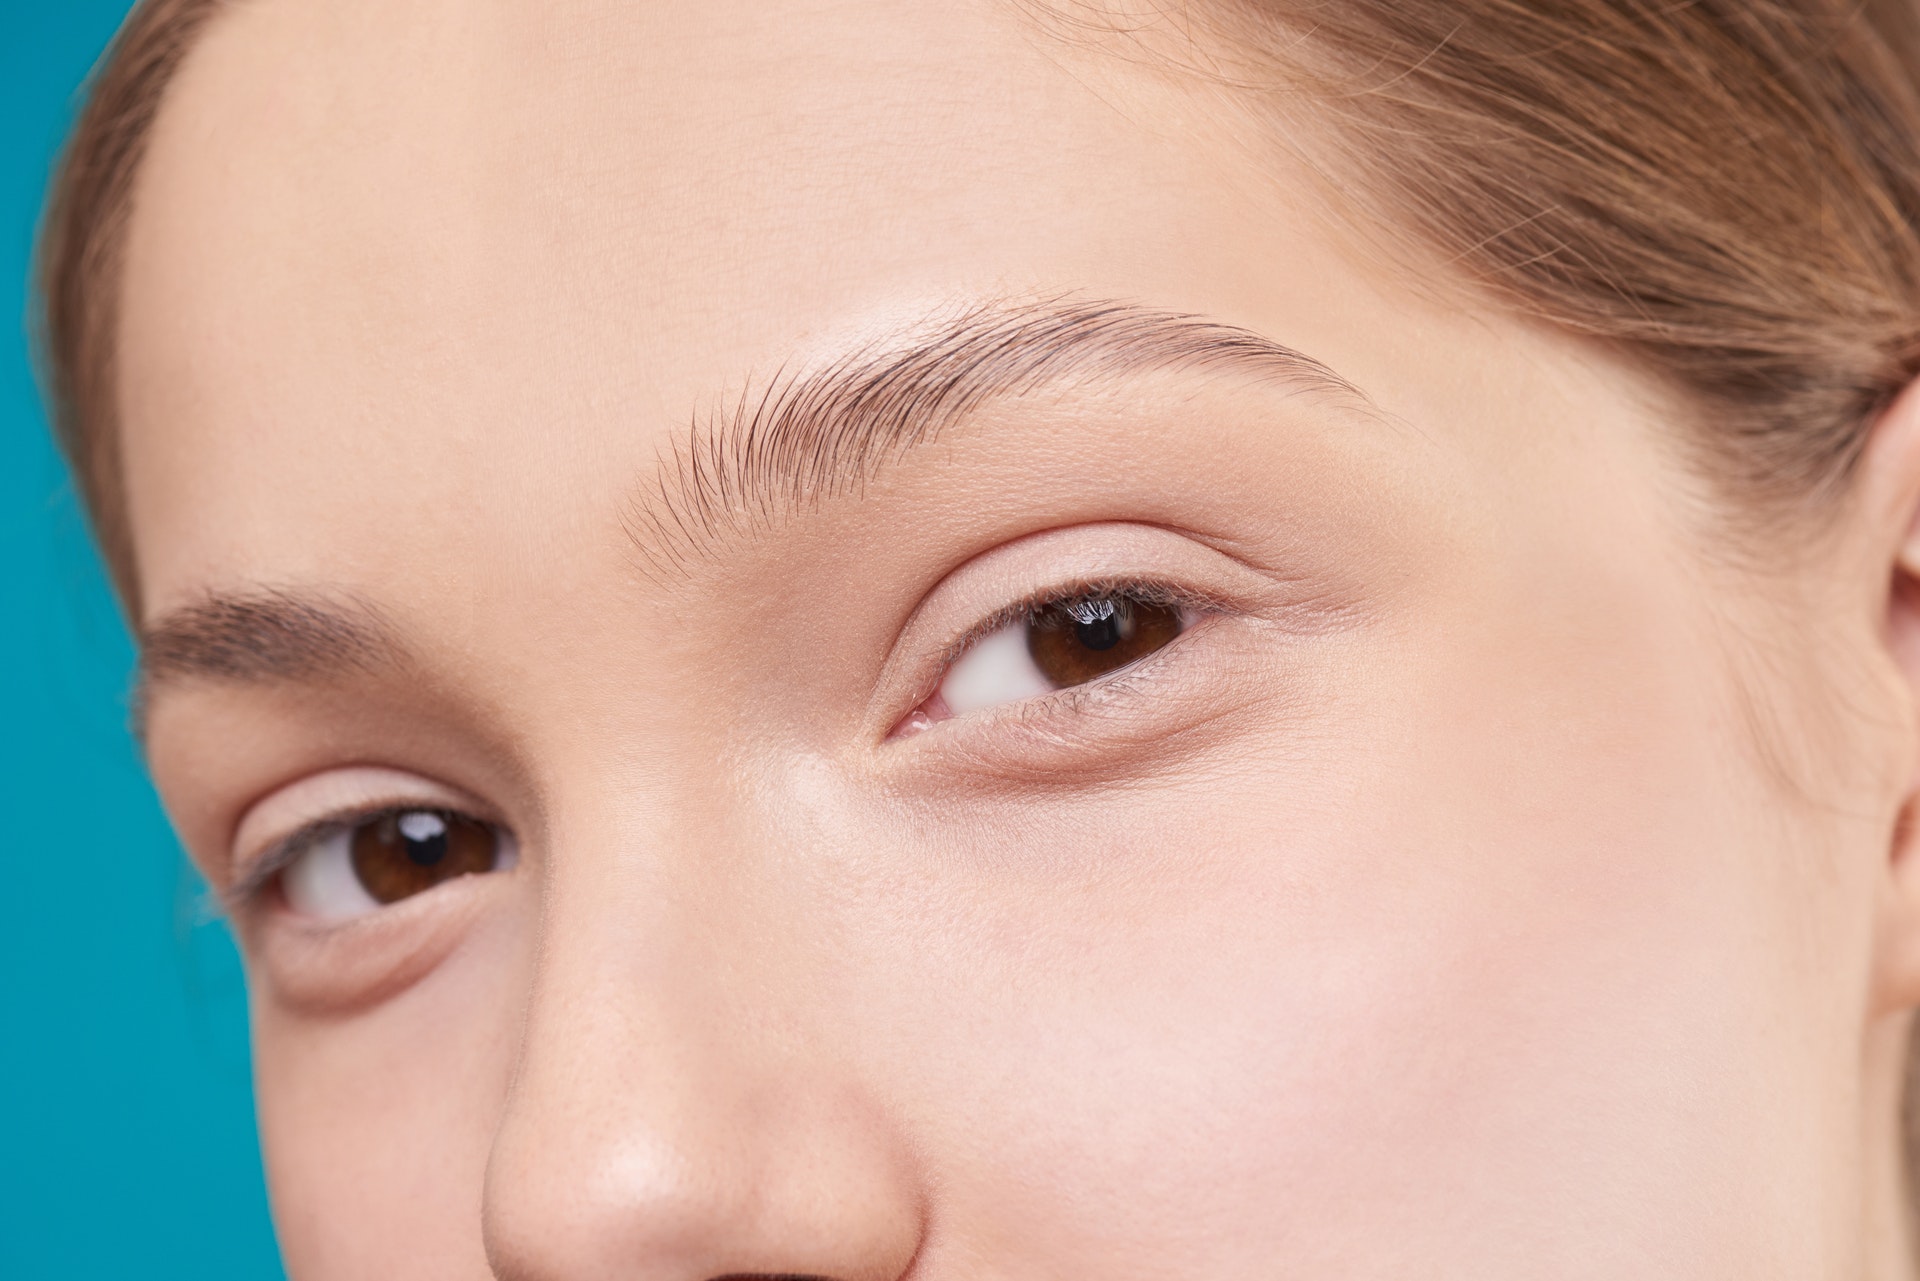 7 close up photo of a woman s eyes 3373714